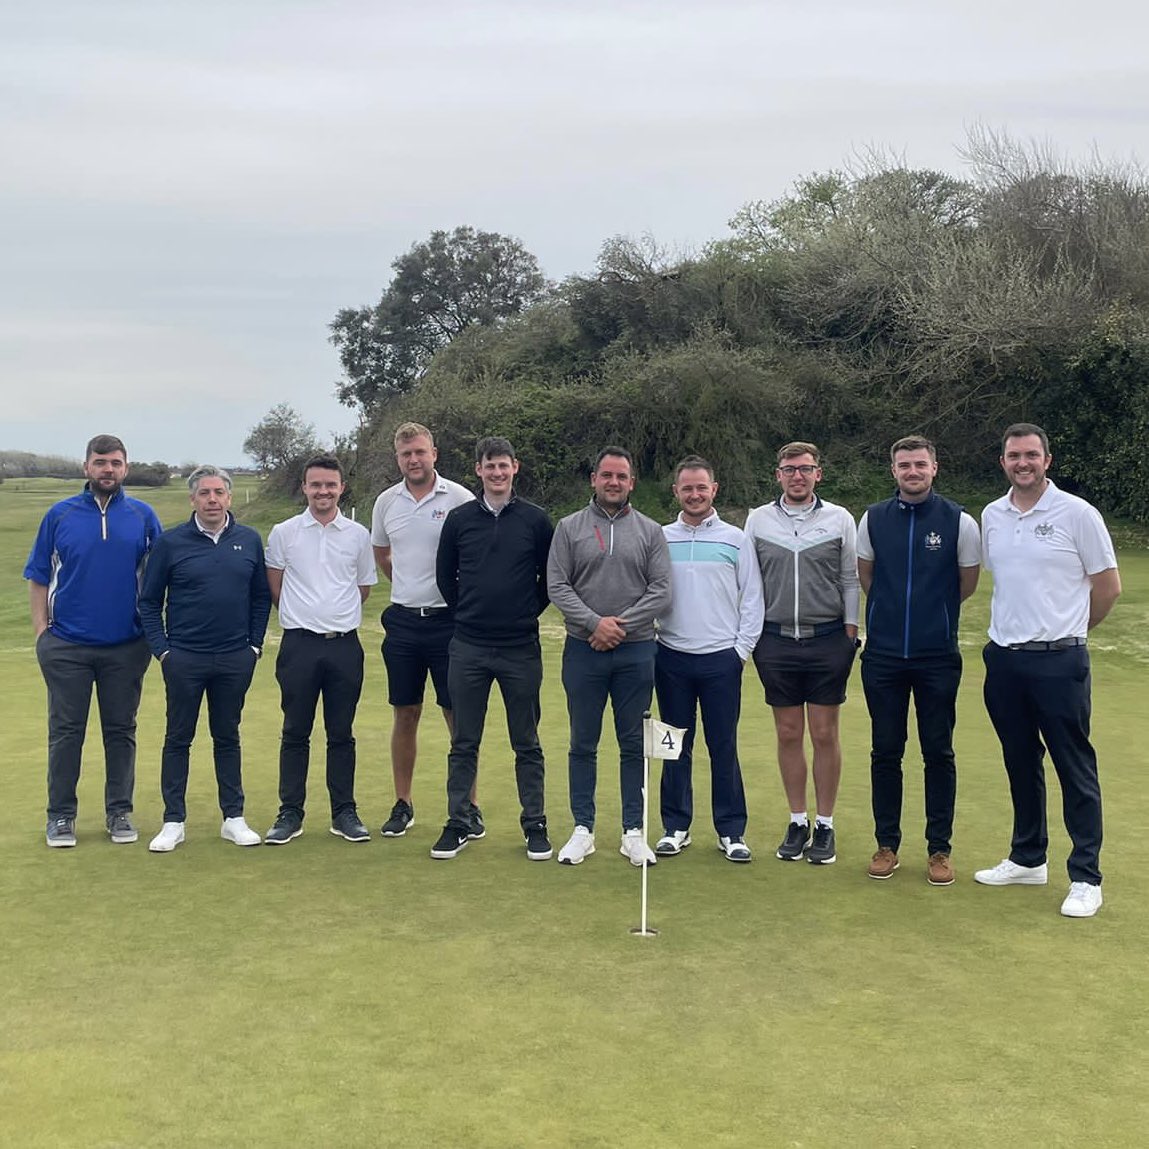 WSMGC 1st team start the season off with a win! Freshly promoted into Division 2 the team were expecting tough competition but managed to win convincingly in 3 of the 5 matches. Final result 3-2 win at home.#linksgolf #westonsupermaregolfclub #alistermackenzie